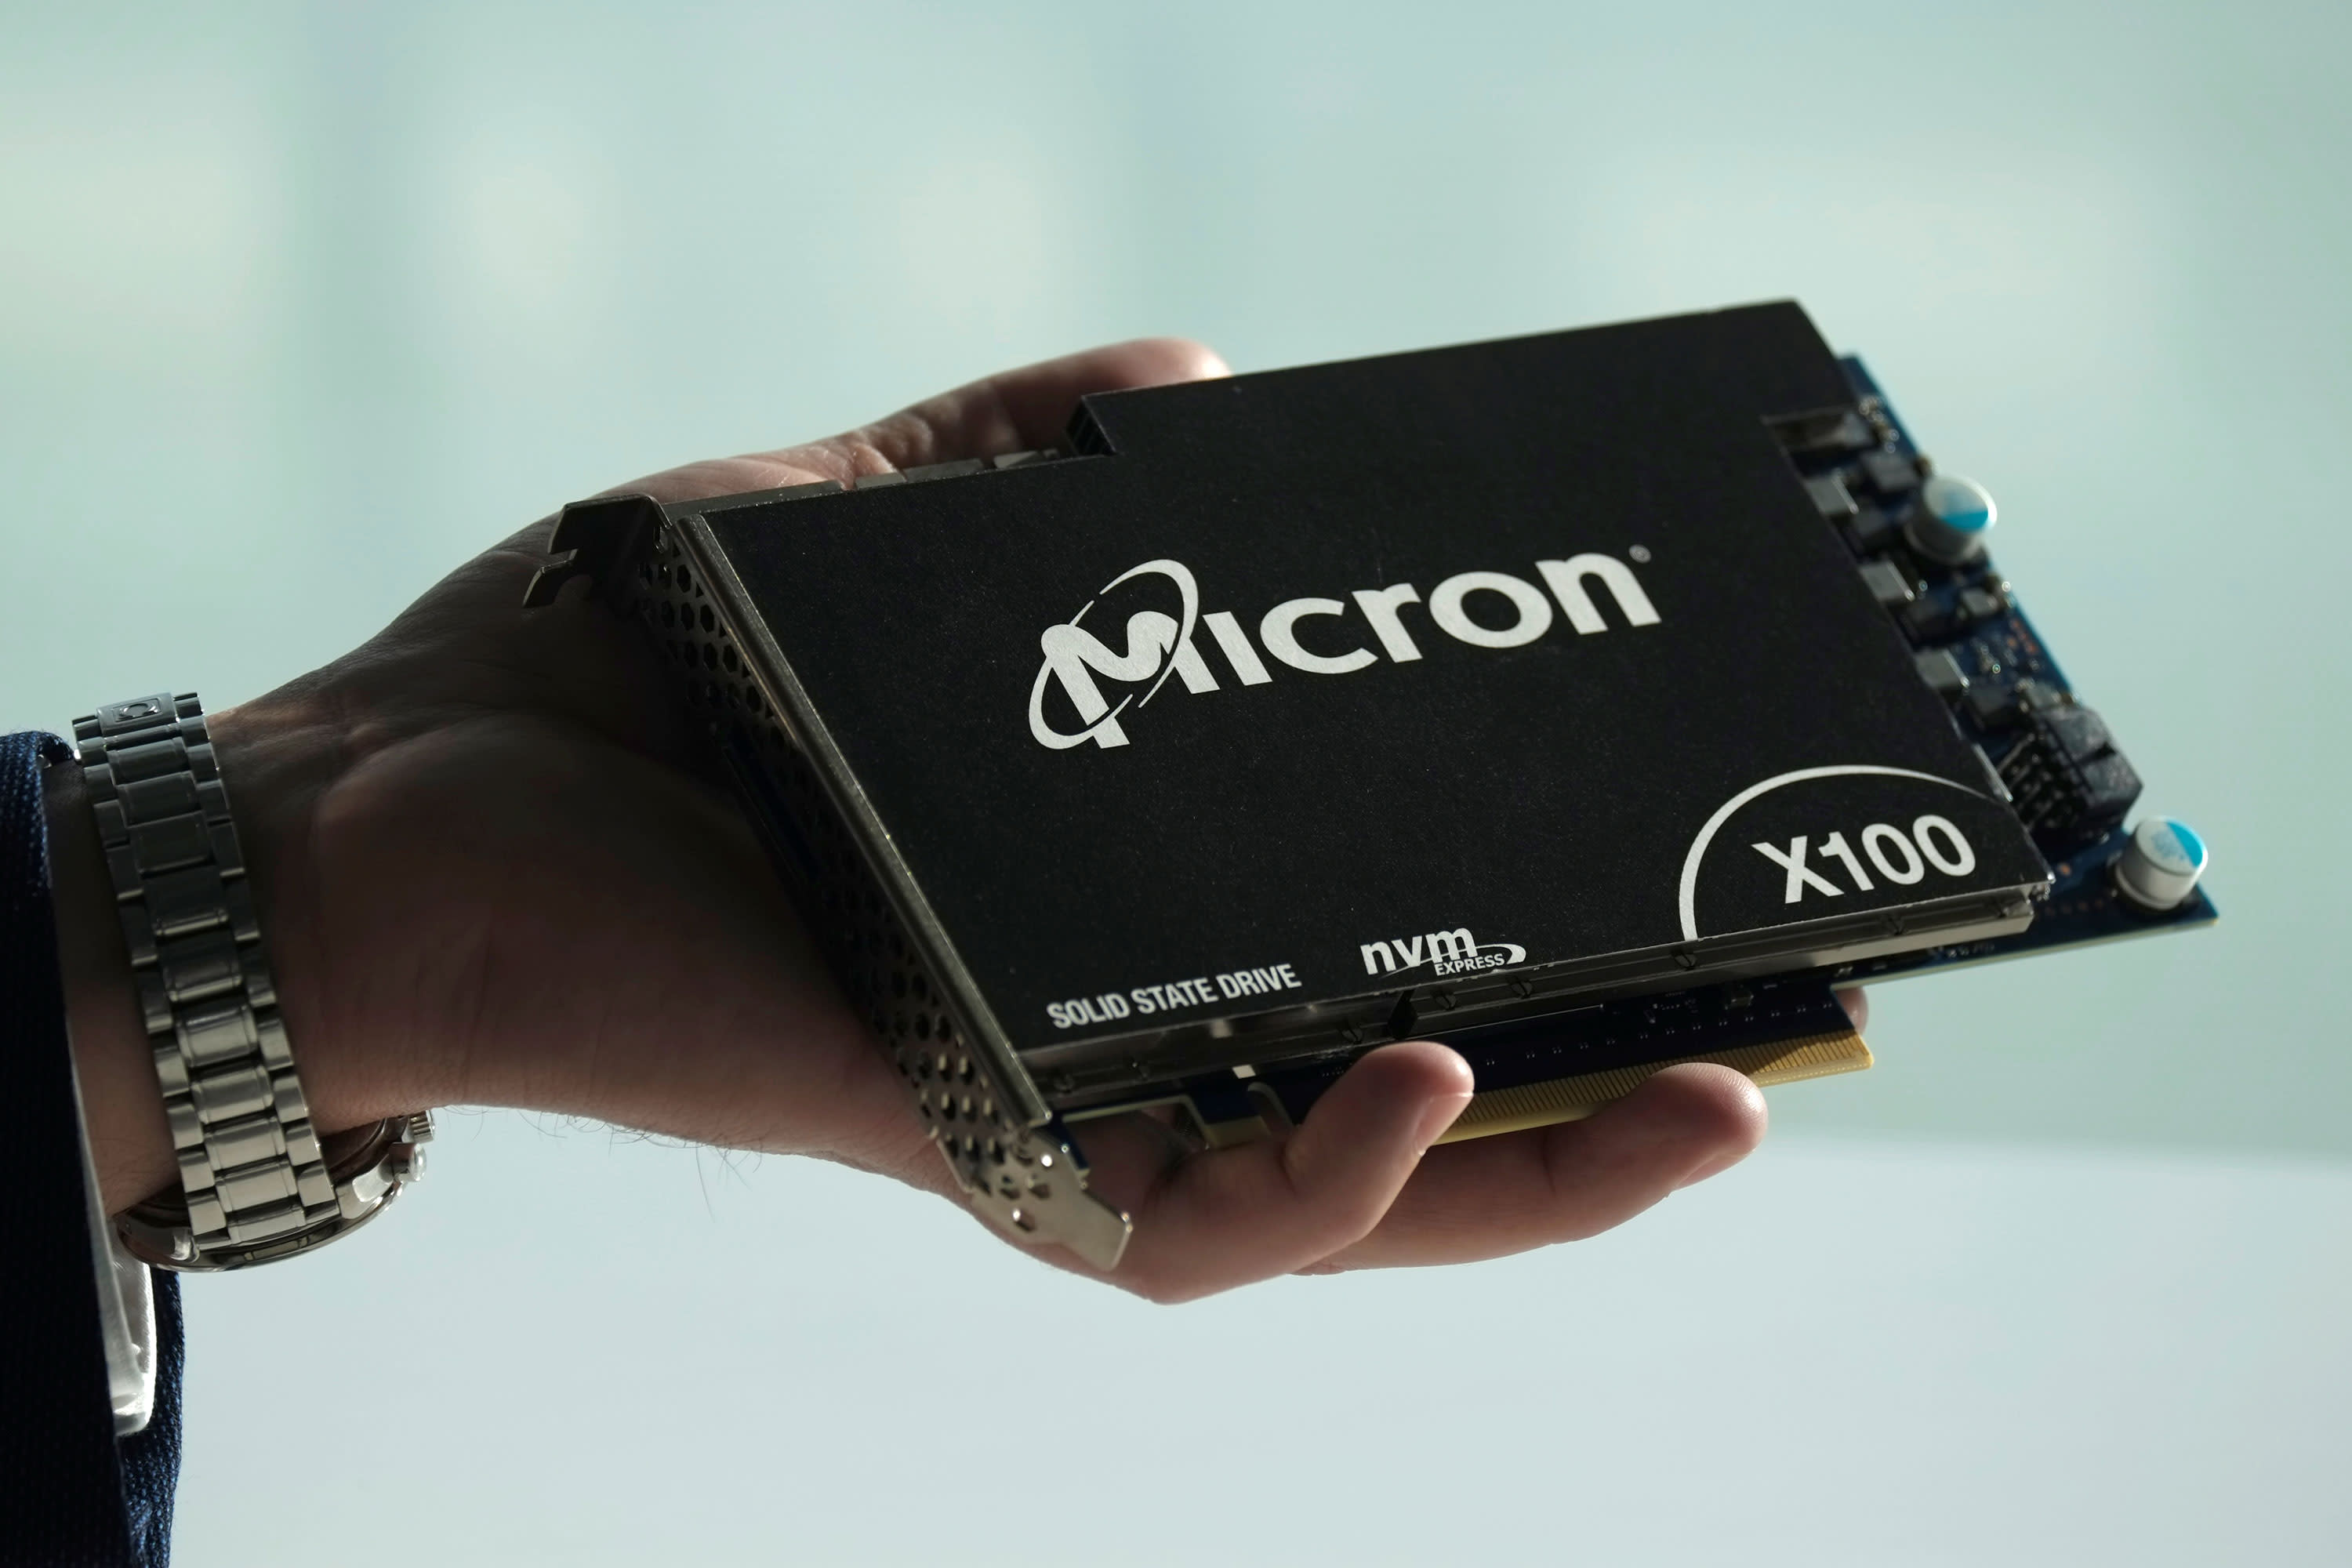 Morgan Stanley names 2 chip stocks with 'significant upside' as China bans Micron